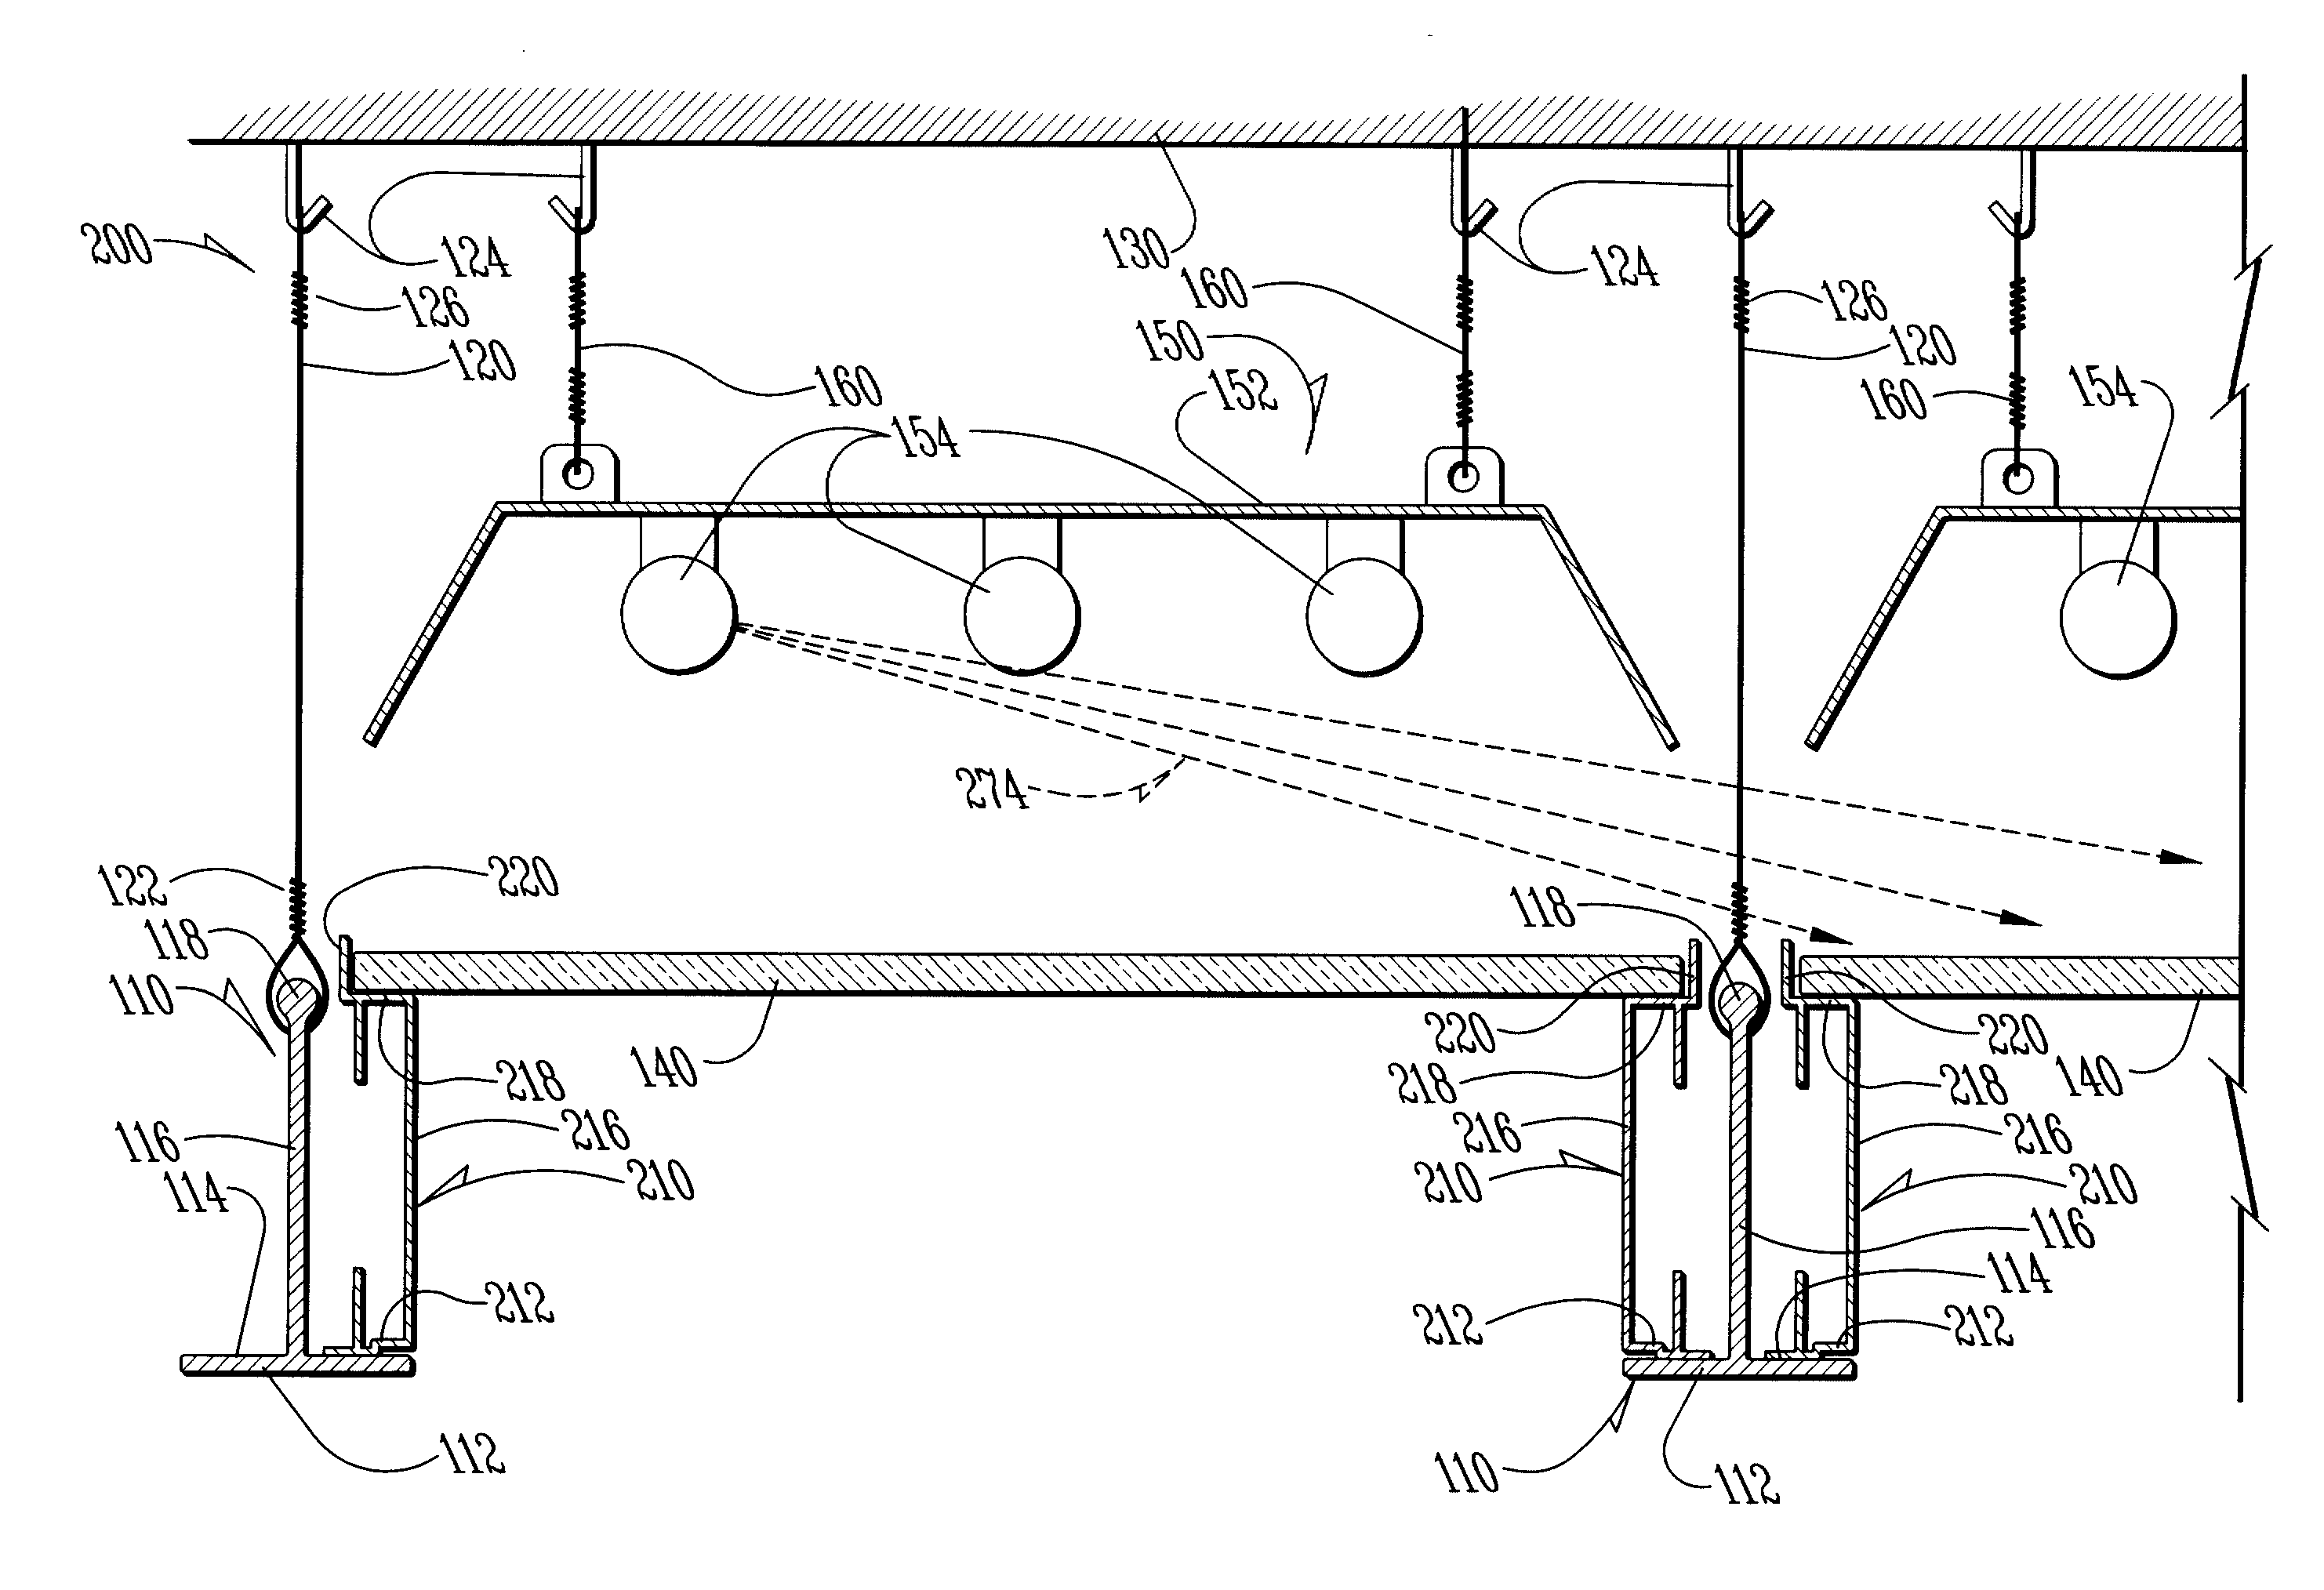 Method and system for creating an illusion of a skylight